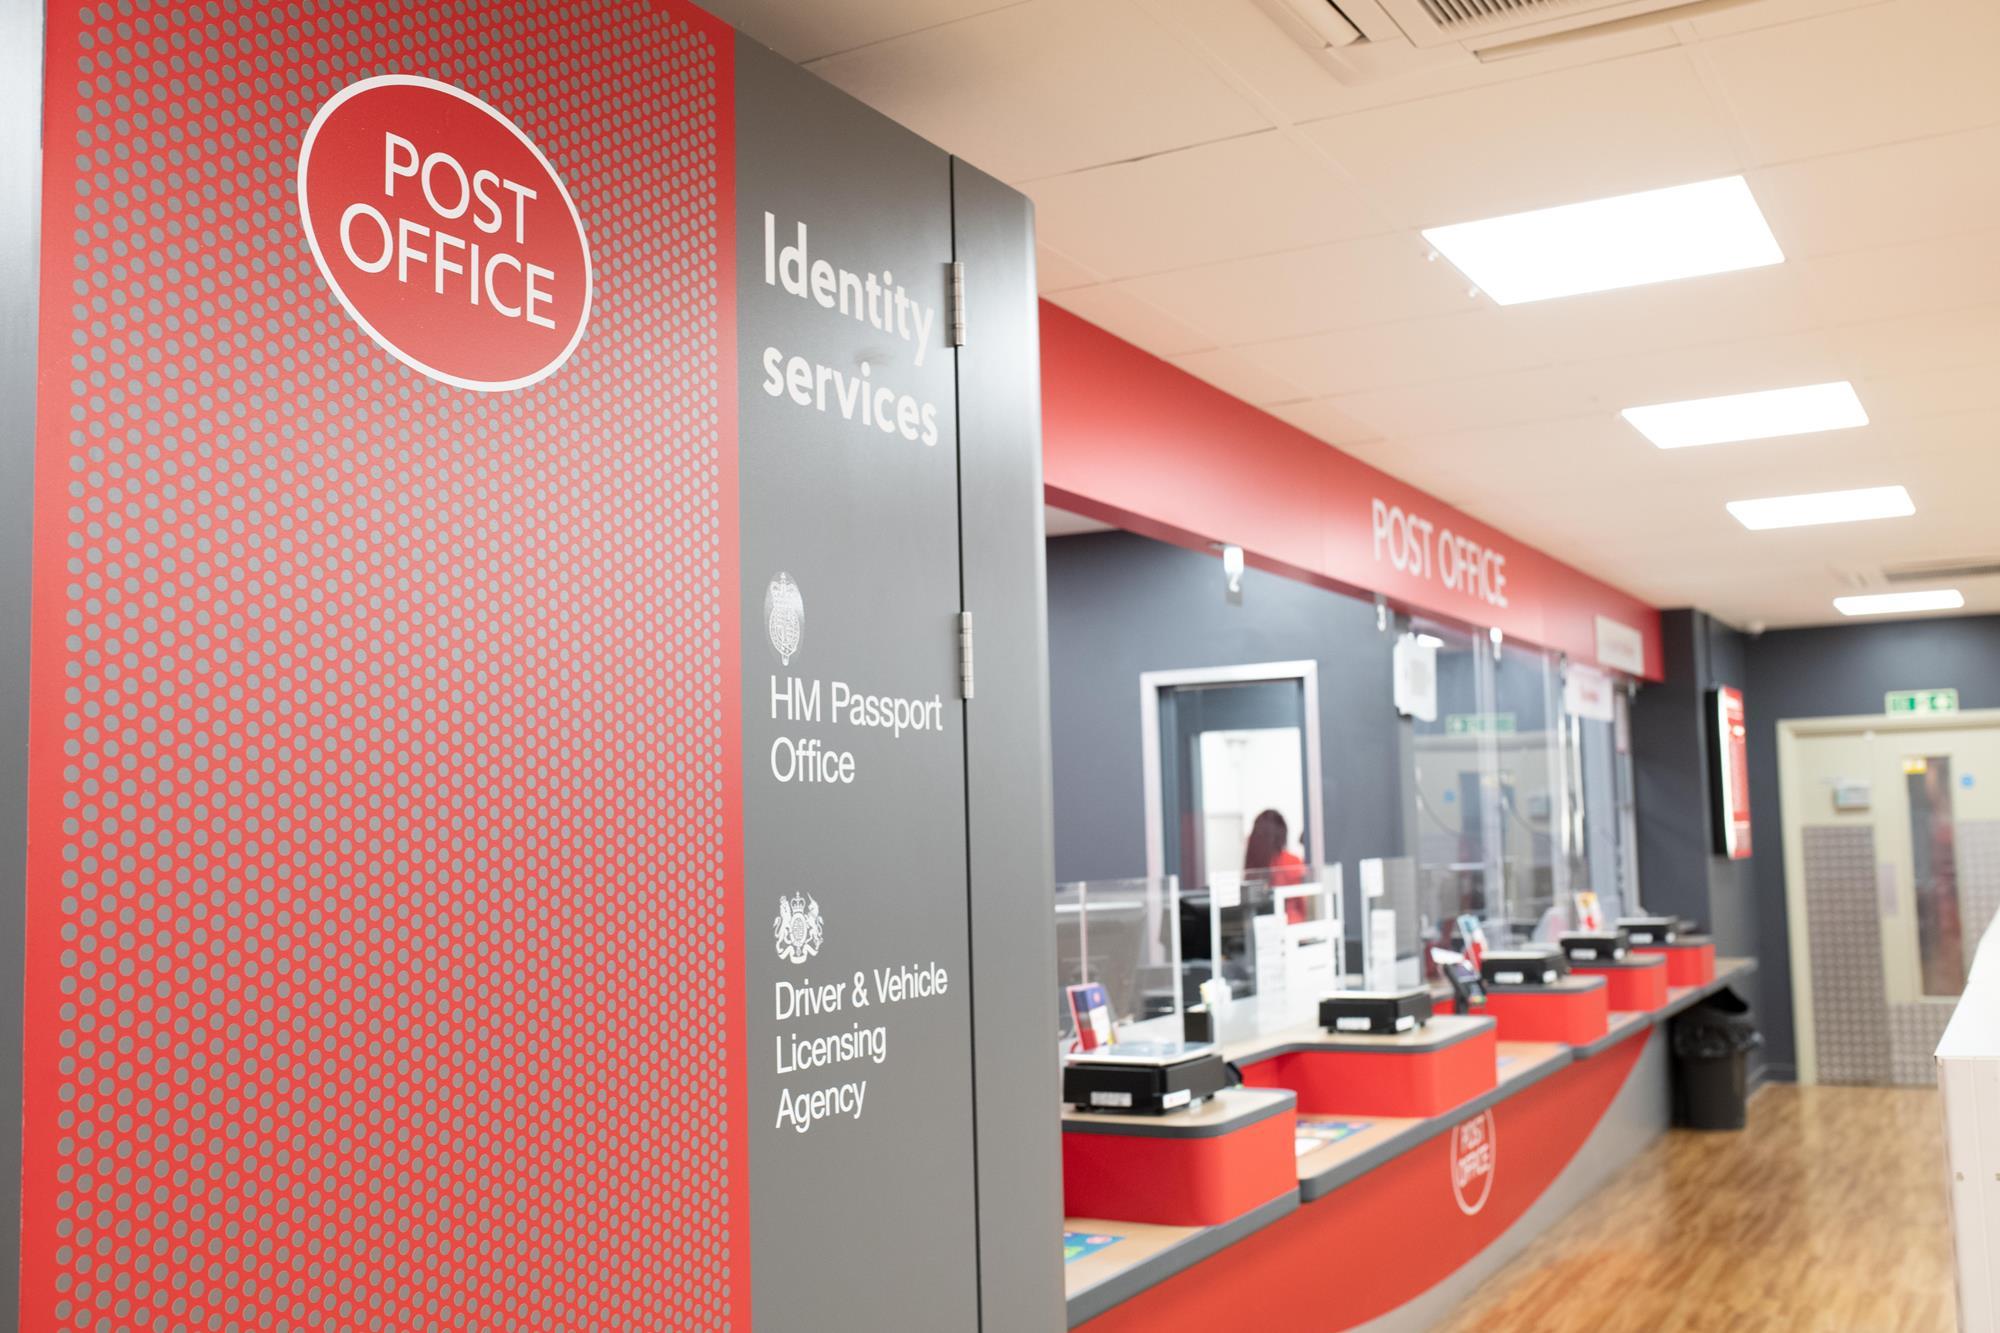 Post Office and Royal Mail no longer working in exclusive partnership under  new deal | News | The Grocer